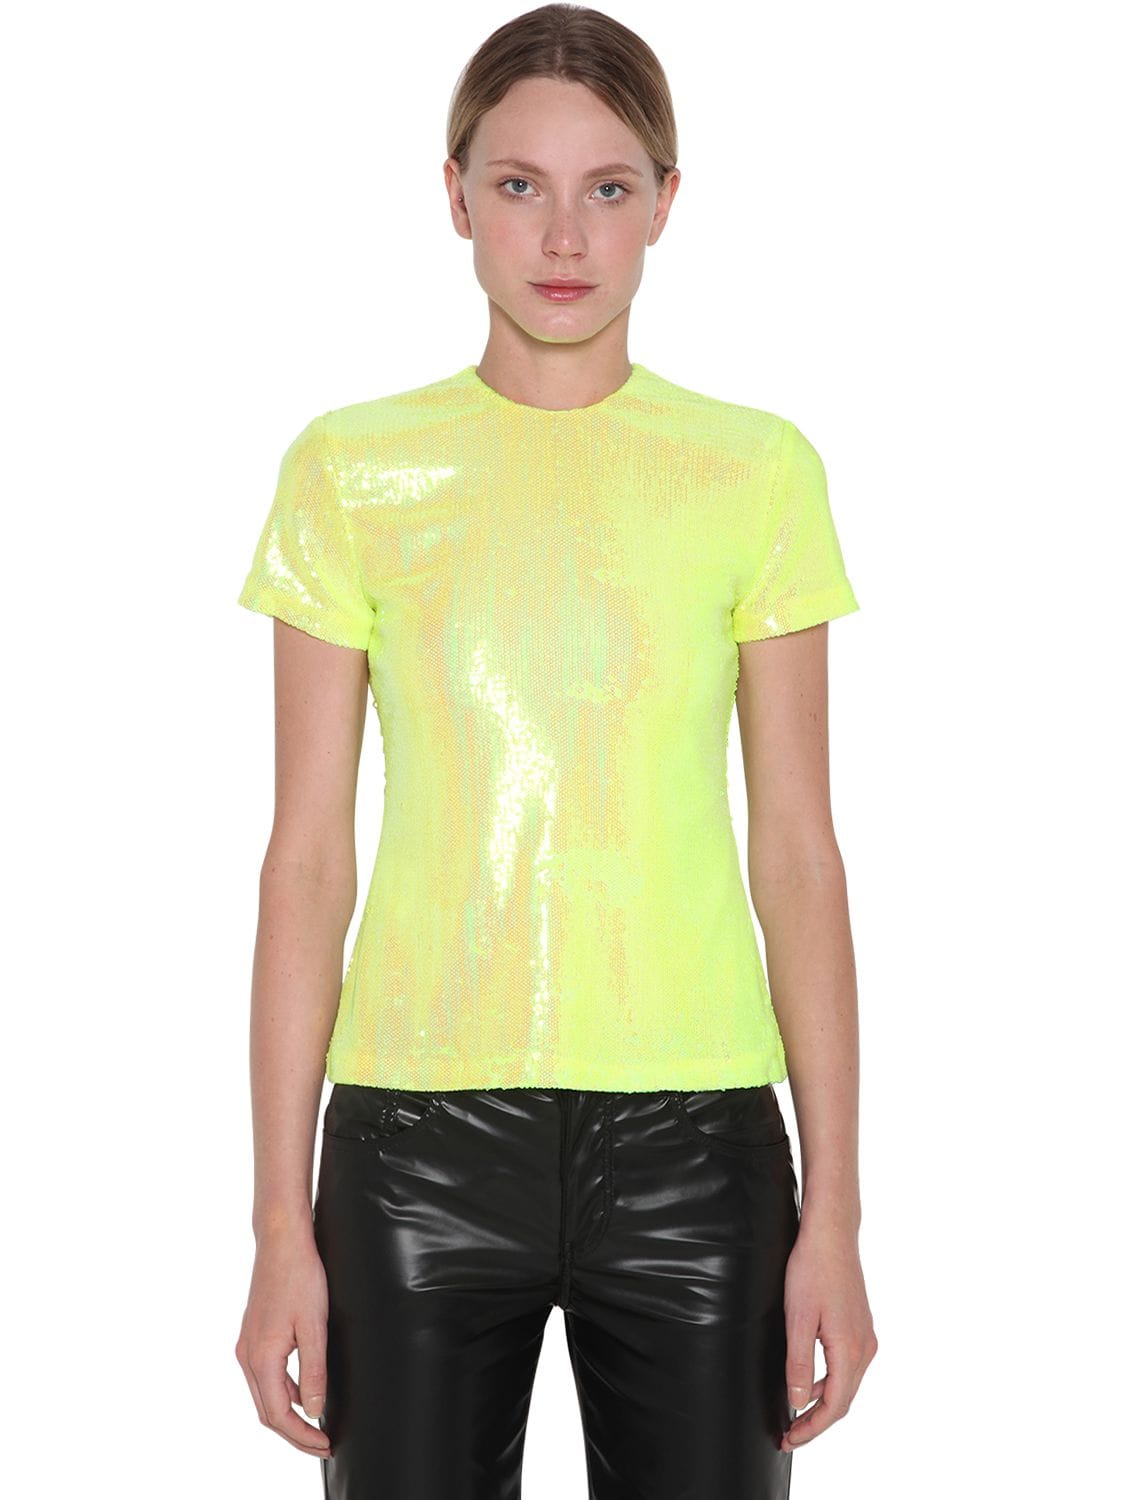 MM6 MAISON MARGIELA SEQUINED SHORT SLEEVE TOP,71IM8L027-MTCY0